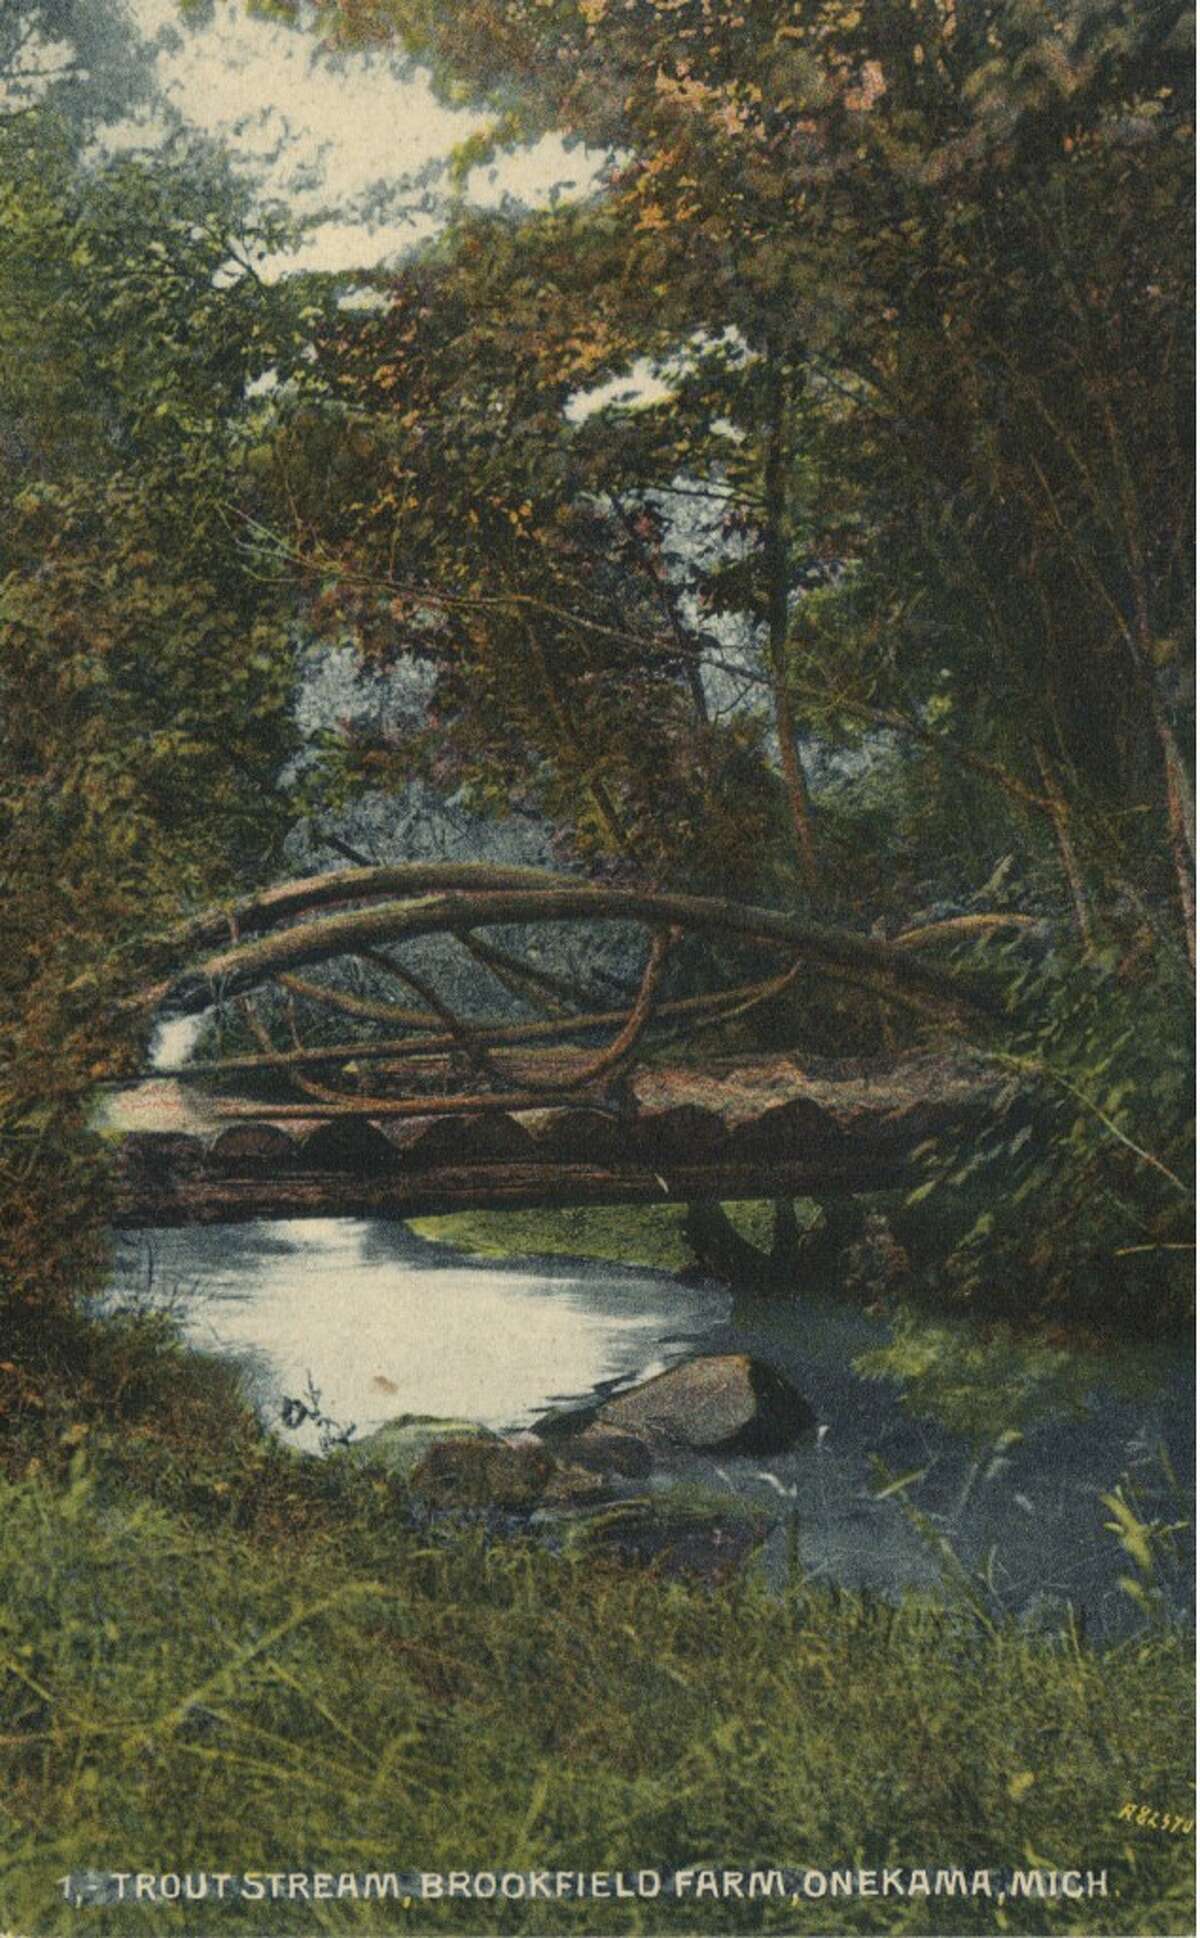 This early 1900s post card sought to entice tourists to the area with a photo of an Onekama trout stream. (Courtesy Photo/Manistee County Historical Museum)